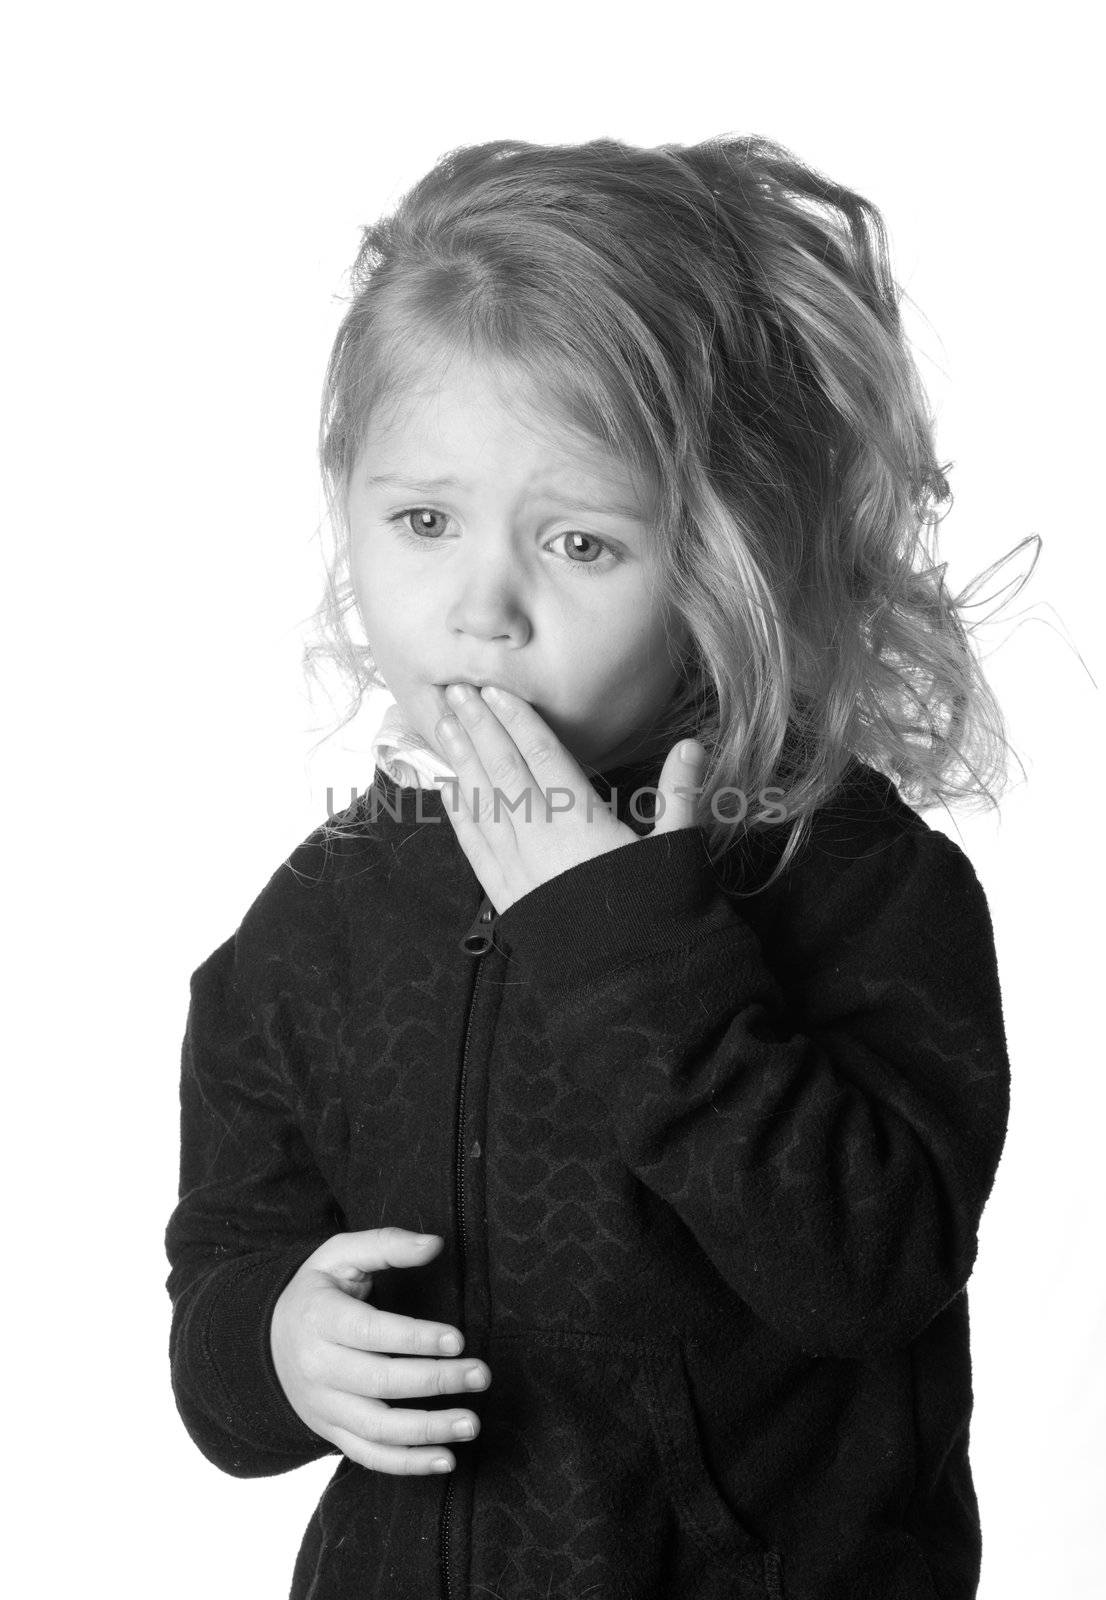 A black and white photograph of  a girl who could be expressing numerous emotions.